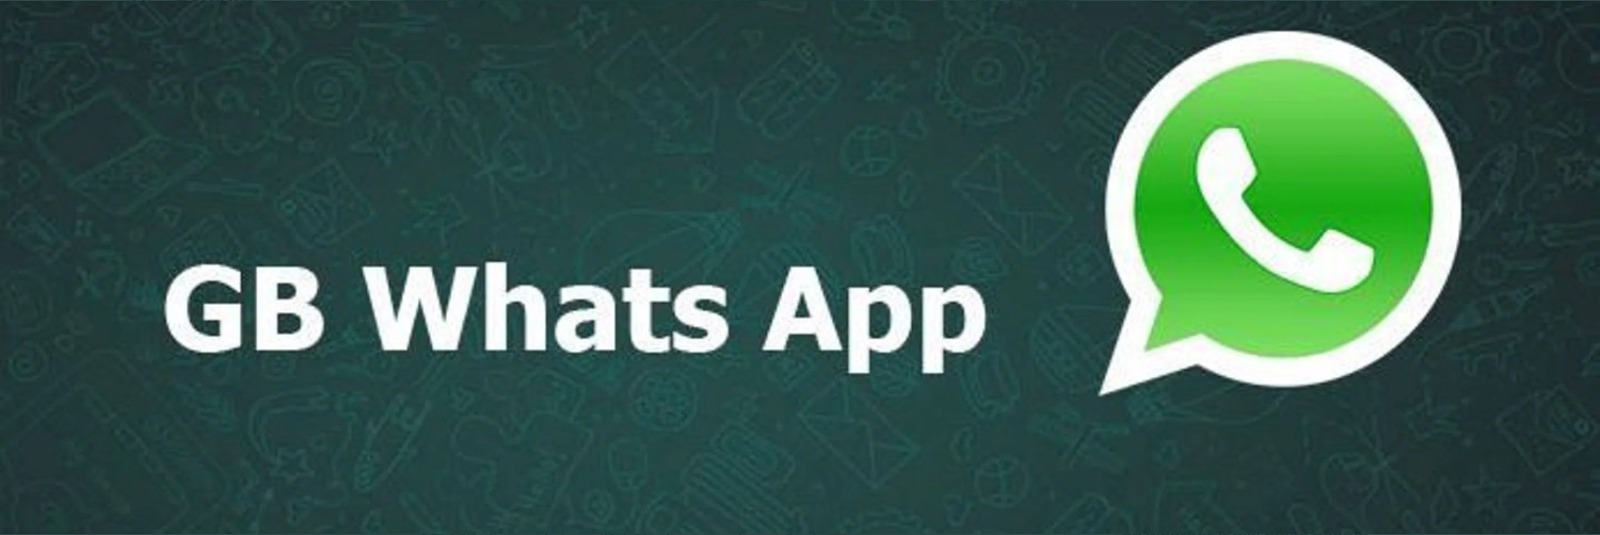 Master the Art of Messaging: GBapps Today